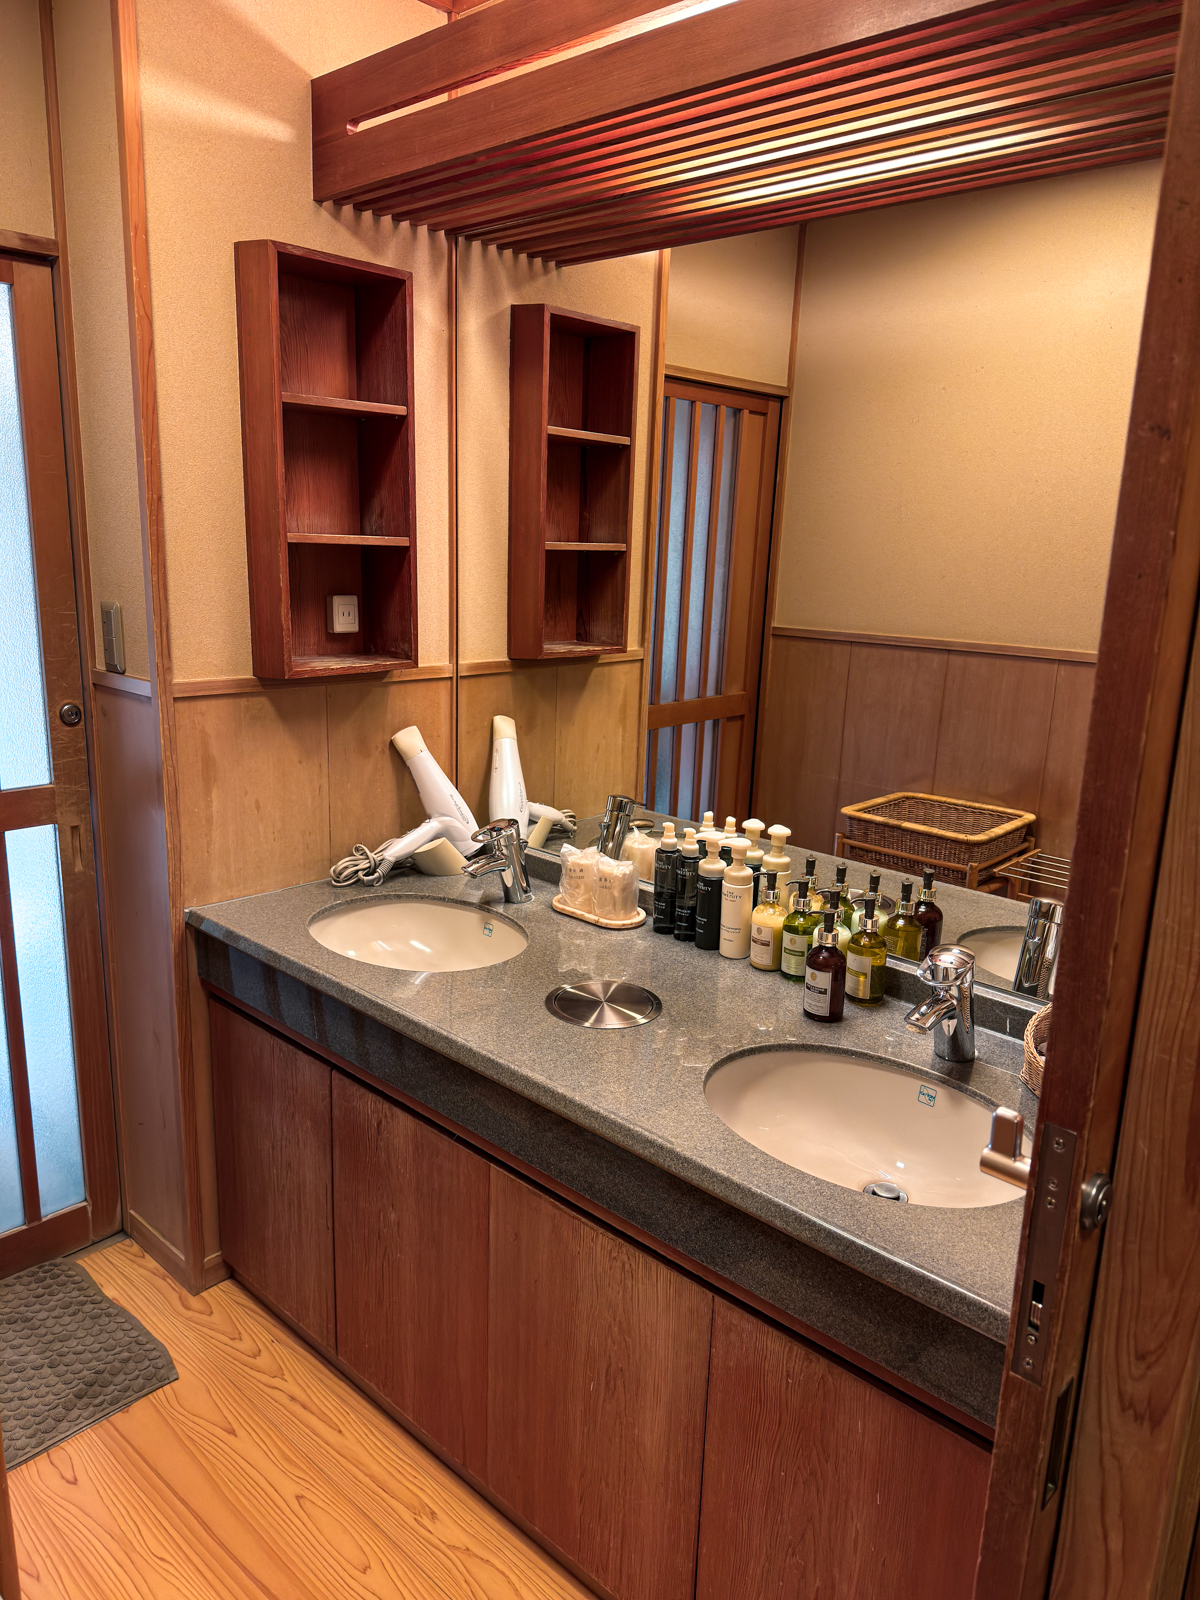 Washroom with two sinks, mirror, hair dryer, and amenities on the counter.